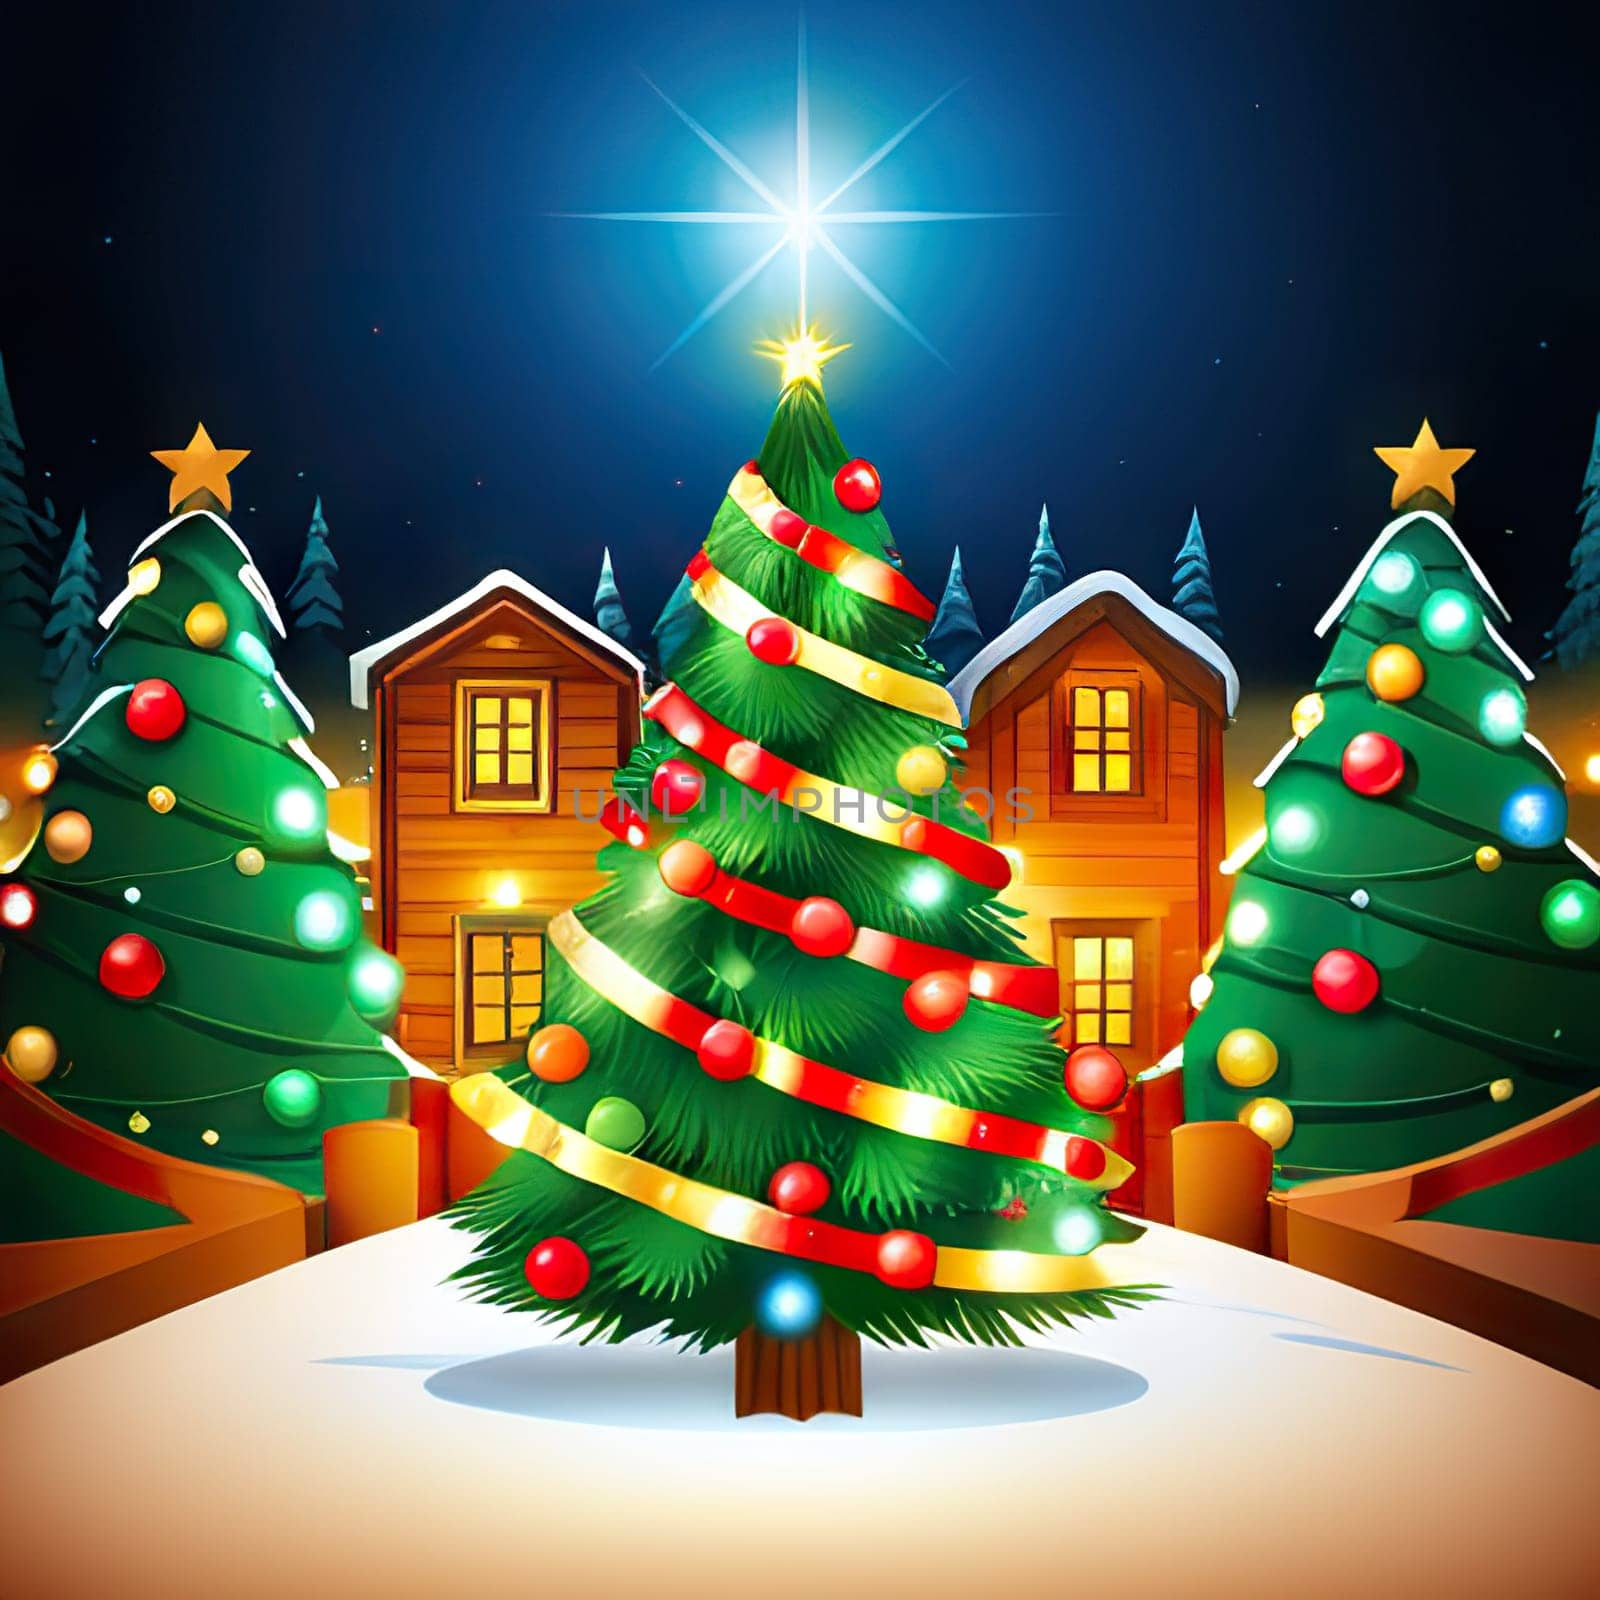 Christmas trees with decorations Christmas and New Year concept, spruce trees with star and garland sign